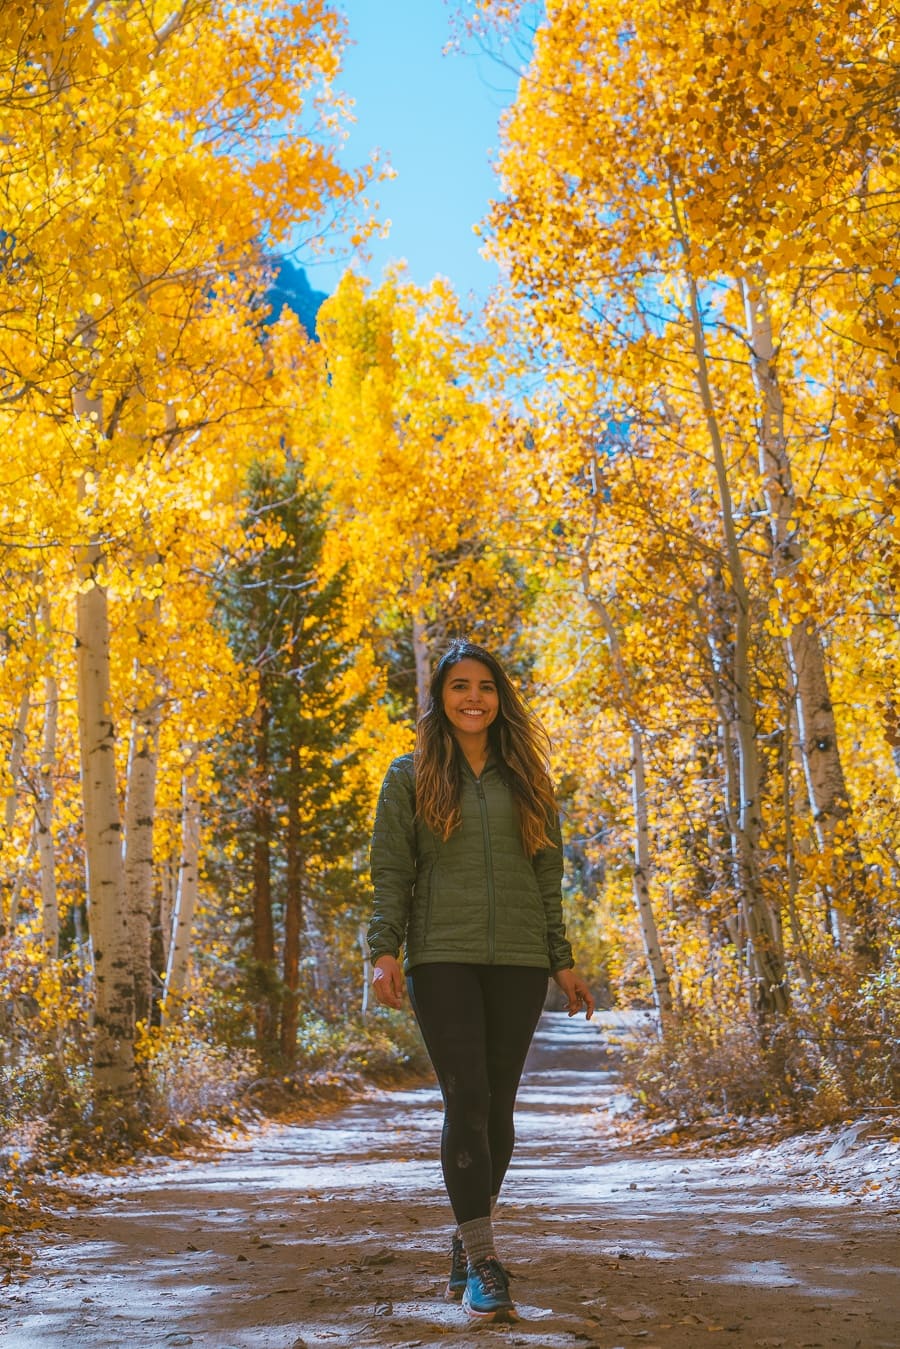 Best Women's Fall Hiking Gear and Clothes